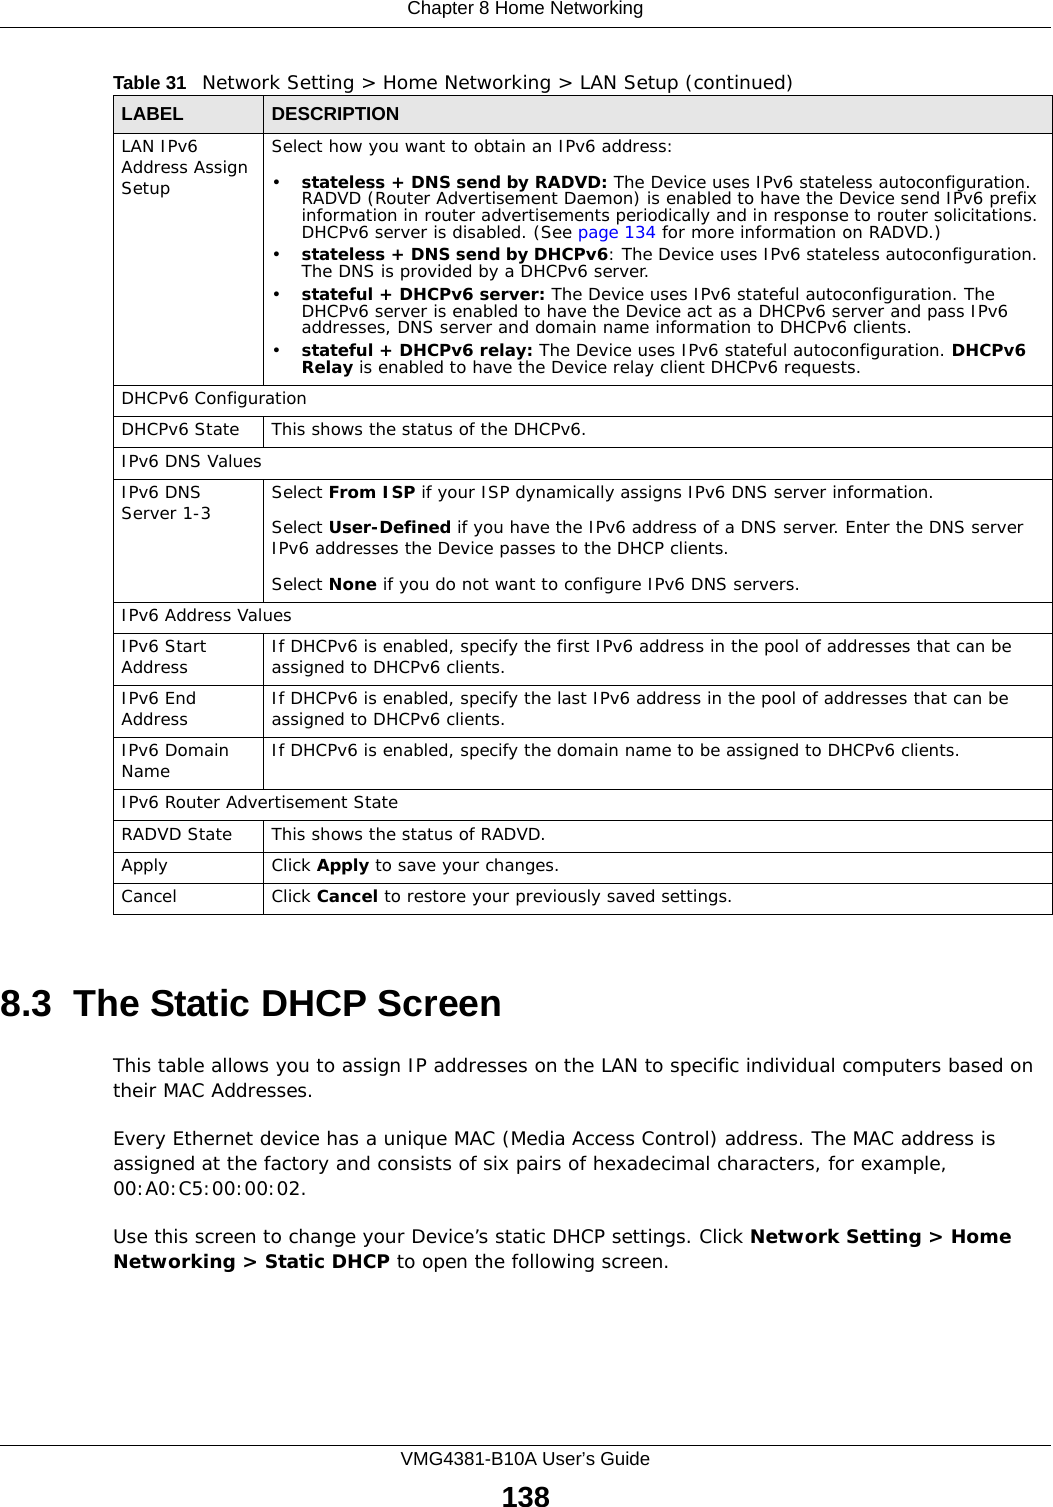 Chapter 8 Home NetworkingVMG4381-B10A User’s Guide1388.3  The Static DHCP ScreenThis table allows you to assign IP addresses on the LAN to specific individual computers based on their MAC Addresses. Every Ethernet device has a unique MAC (Media Access Control) address. The MAC address is assigned at the factory and consists of six pairs of hexadecimal characters, for example, 00:A0:C5:00:00:02.Use this screen to change your Device’s static DHCP settings. Click Network Setting &gt; Home Networking &gt; Static DHCP to open the following screen.LAN IPv6 Address Assign SetupSelect how you want to obtain an IPv6 address: •stateless + DNS send by RADVD: The Device uses IPv6 stateless autoconfiguration. RADVD (Router Advertisement Daemon) is enabled to have the Device send IPv6 prefix information in router advertisements periodically and in response to router solicitations. DHCPv6 server is disabled. (See page 134 for more information on RADVD.)•stateless + DNS send by DHCPv6: The Device uses IPv6 stateless autoconfiguration. The DNS is provided by a DHCPv6 server.•stateful + DHCPv6 server: The Device uses IPv6 stateful autoconfiguration. The DHCPv6 server is enabled to have the Device act as a DHCPv6 server and pass IPv6 addresses, DNS server and domain name information to DHCPv6 clients.•stateful + DHCPv6 relay: The Device uses IPv6 stateful autoconfiguration. DHCPv6 Relay is enabled to have the Device relay client DHCPv6 requests. DHCPv6 ConfigurationDHCPv6 State  This shows the status of the DHCPv6. IPv6 DNS ValuesIPv6 DNS Server 1-3 Select From ISP if your ISP dynamically assigns IPv6 DNS server information.Select User-Defined if you have the IPv6 address of a DNS server. Enter the DNS server IPv6 addresses the Device passes to the DHCP clients.Select None if you do not want to configure IPv6 DNS servers.IPv6 Address ValuesIPv6 Start Address If DHCPv6 is enabled, specify the first IPv6 address in the pool of addresses that can be assigned to DHCPv6 clients. IPv6 End Address If DHCPv6 is enabled, specify the last IPv6 address in the pool of addresses that can be assigned to DHCPv6 clients. IPv6 Domain Name  If DHCPv6 is enabled, specify the domain name to be assigned to DHCPv6 clients.IPv6 Router Advertisement StateRADVD State  This shows the status of RADVD.Apply Click Apply to save your changes.Cancel Click Cancel to restore your previously saved settings.Table 31   Network Setting &gt; Home Networking &gt; LAN Setup (continued)LABEL DESCRIPTION